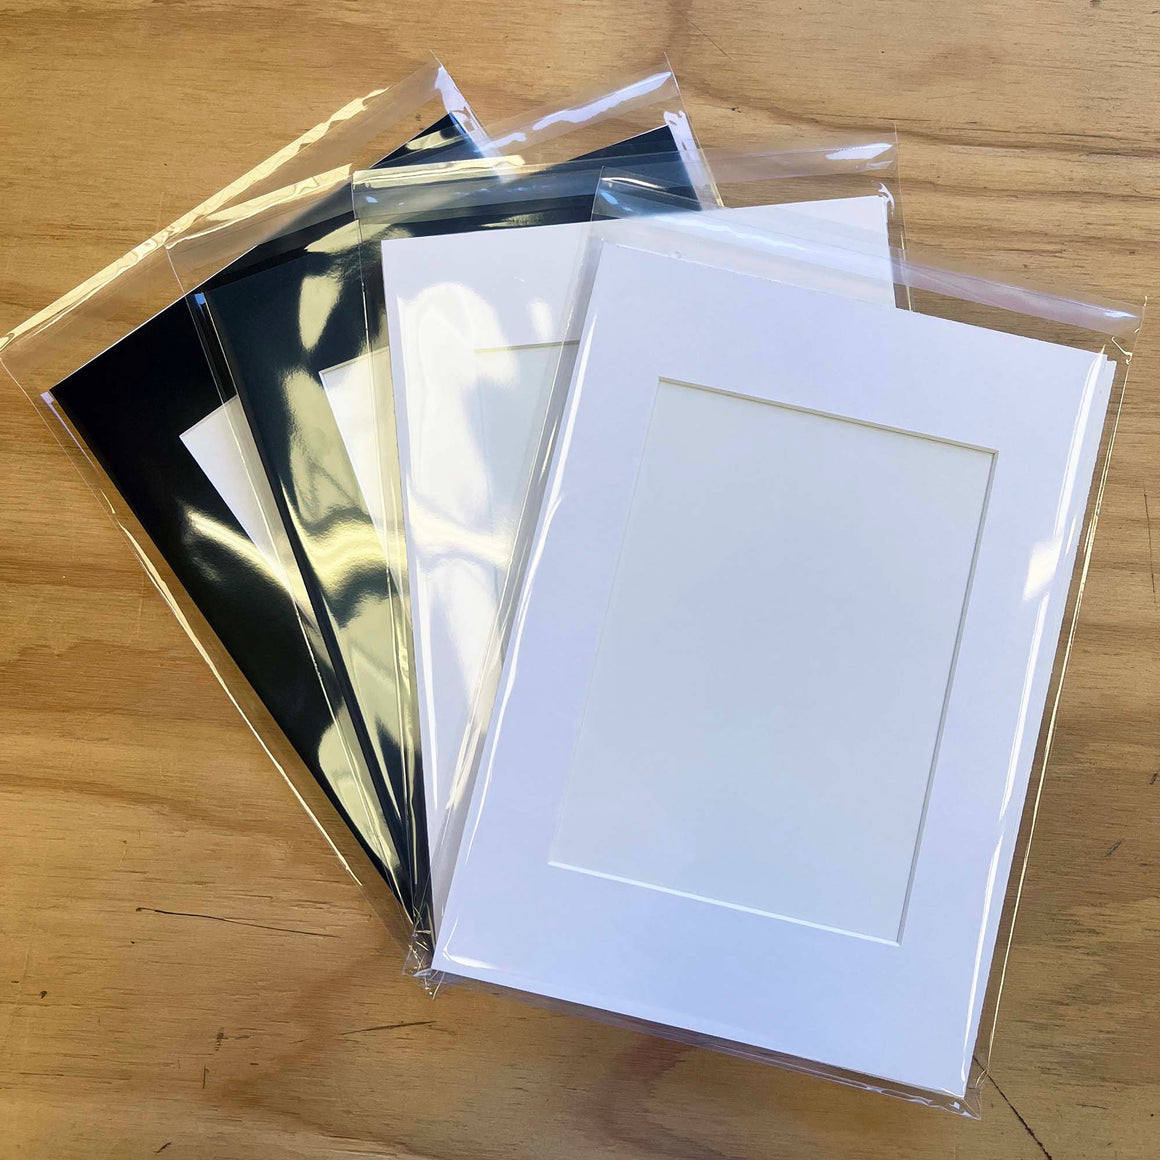 Photo Frame Matboard Insert in your choice of Bright White, Off White, Black or Charcoal Grey. Available to fit in frame size 11"x14", A4 or 8"x10" and window cut to suit your size artwork.